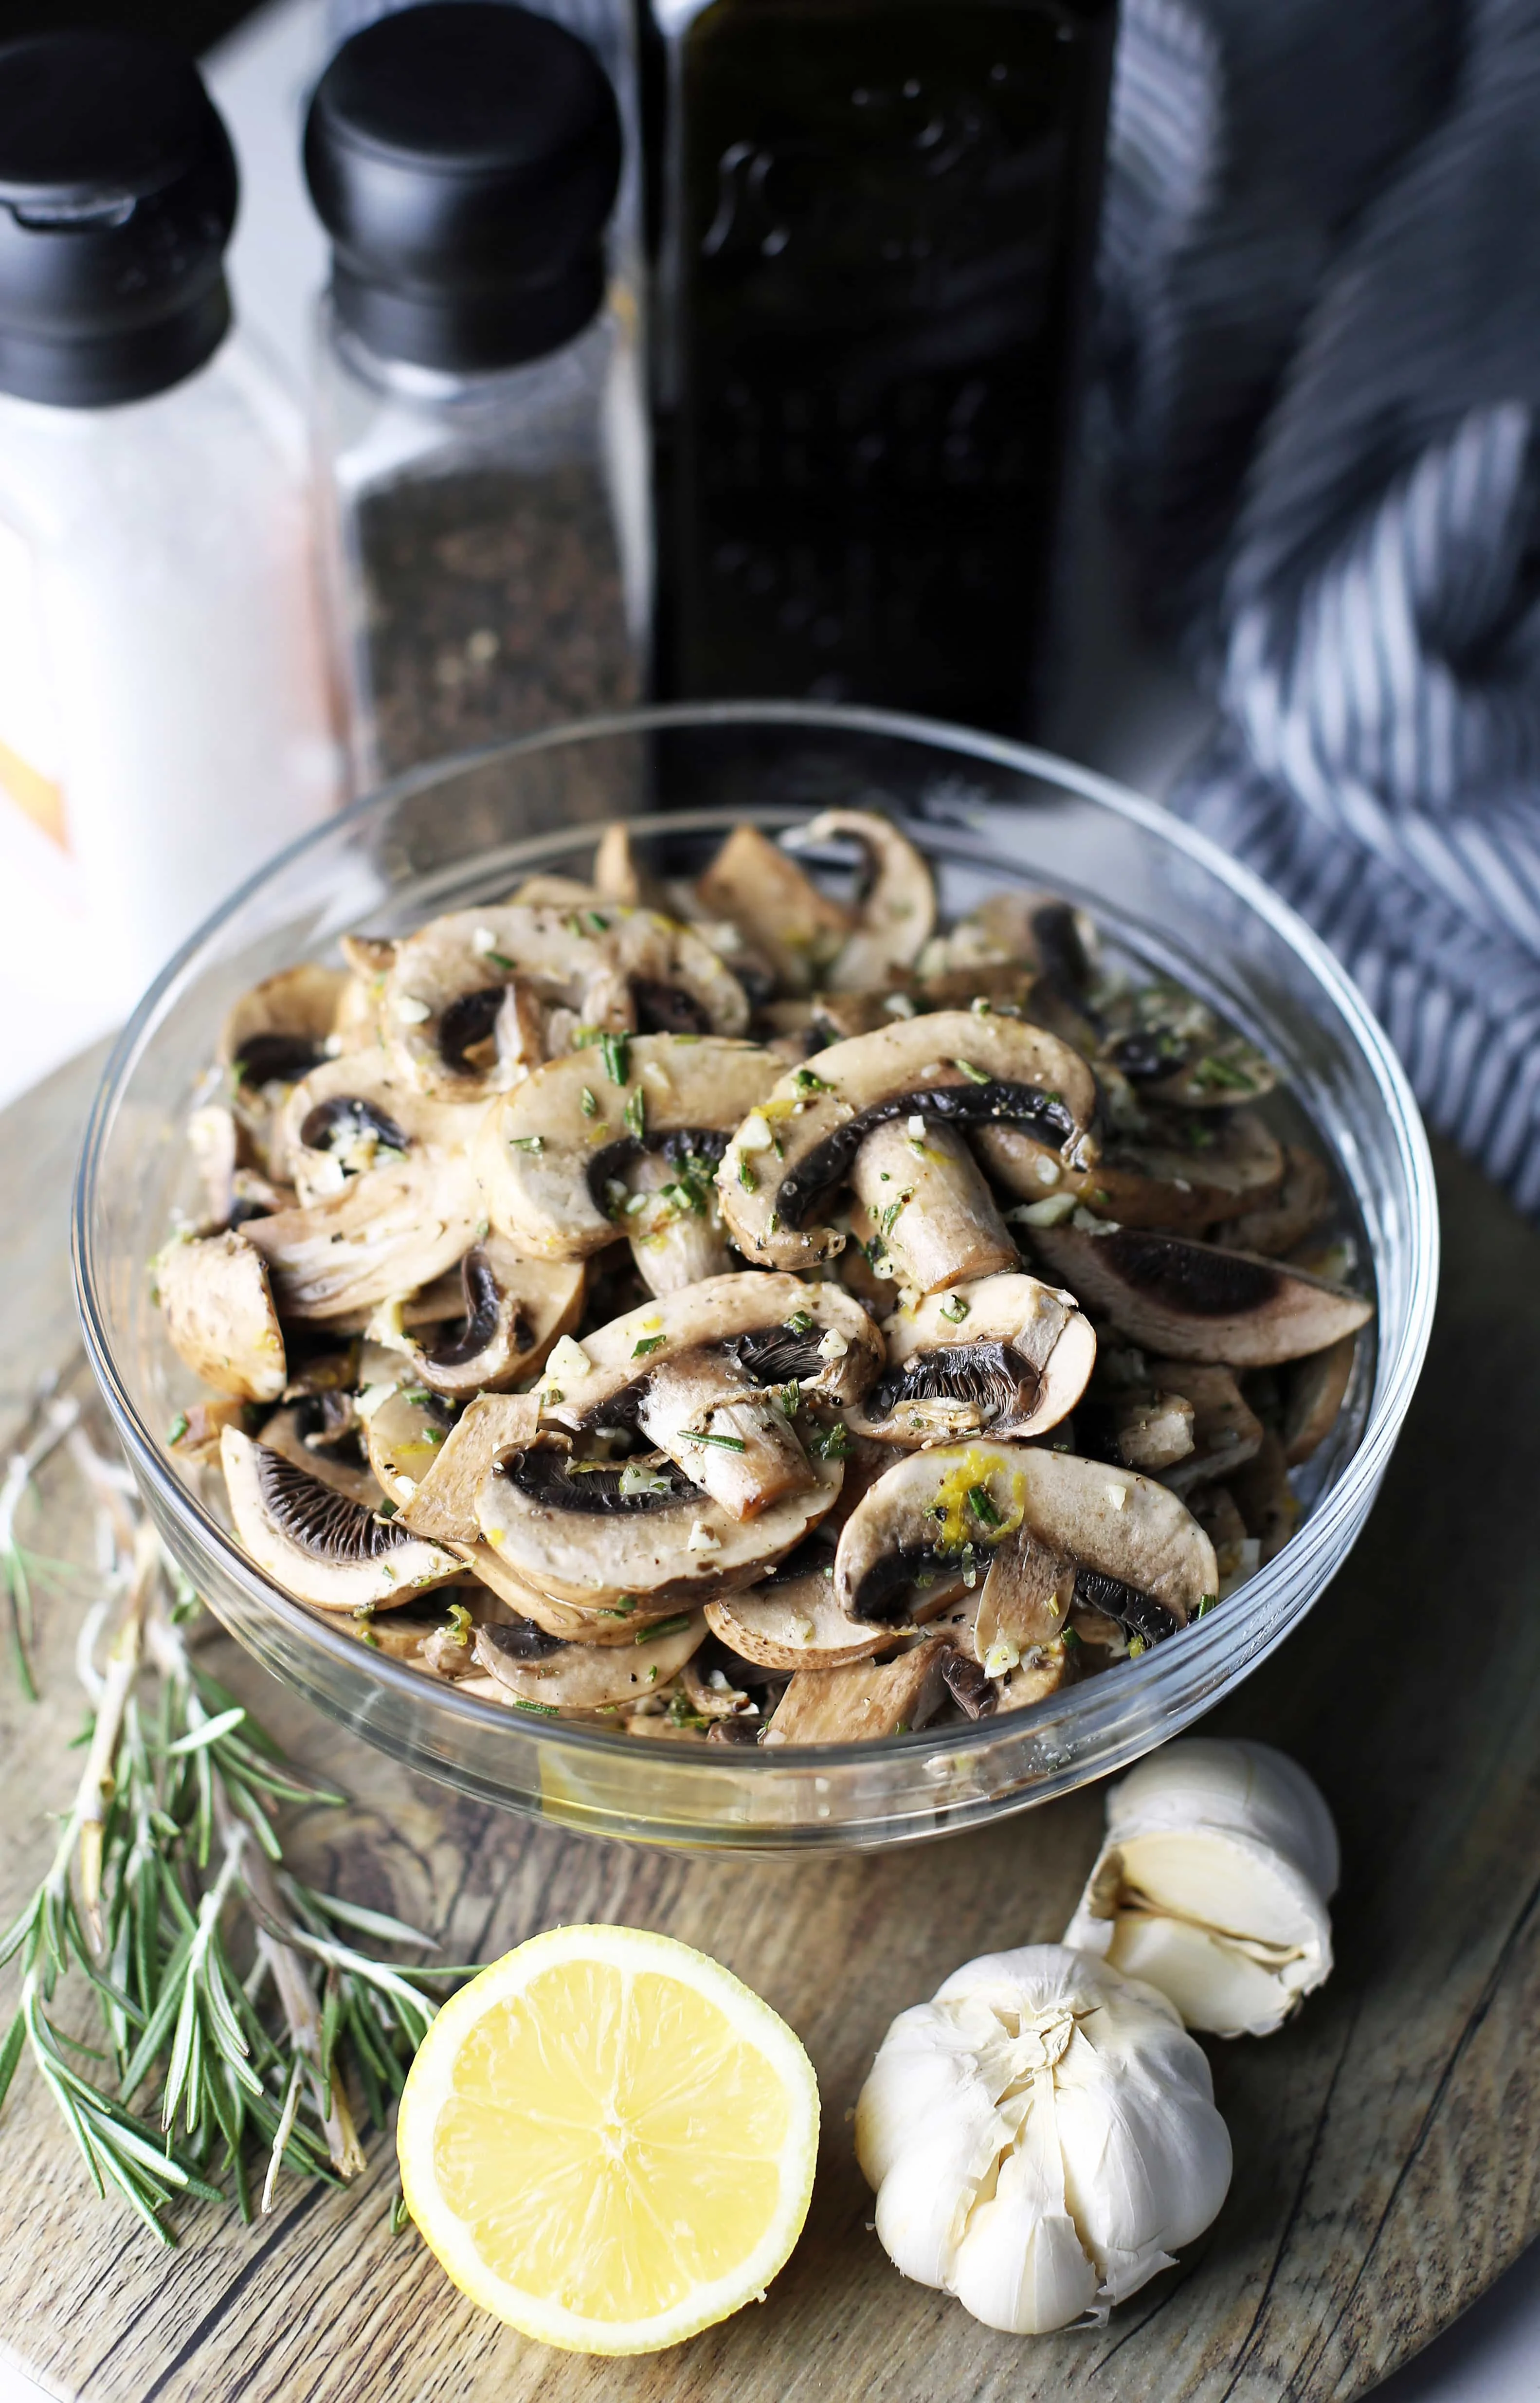 A bowl of sliced cremini mushrooms with garlic, lemon juice and zest, rosemary, and olive oil.